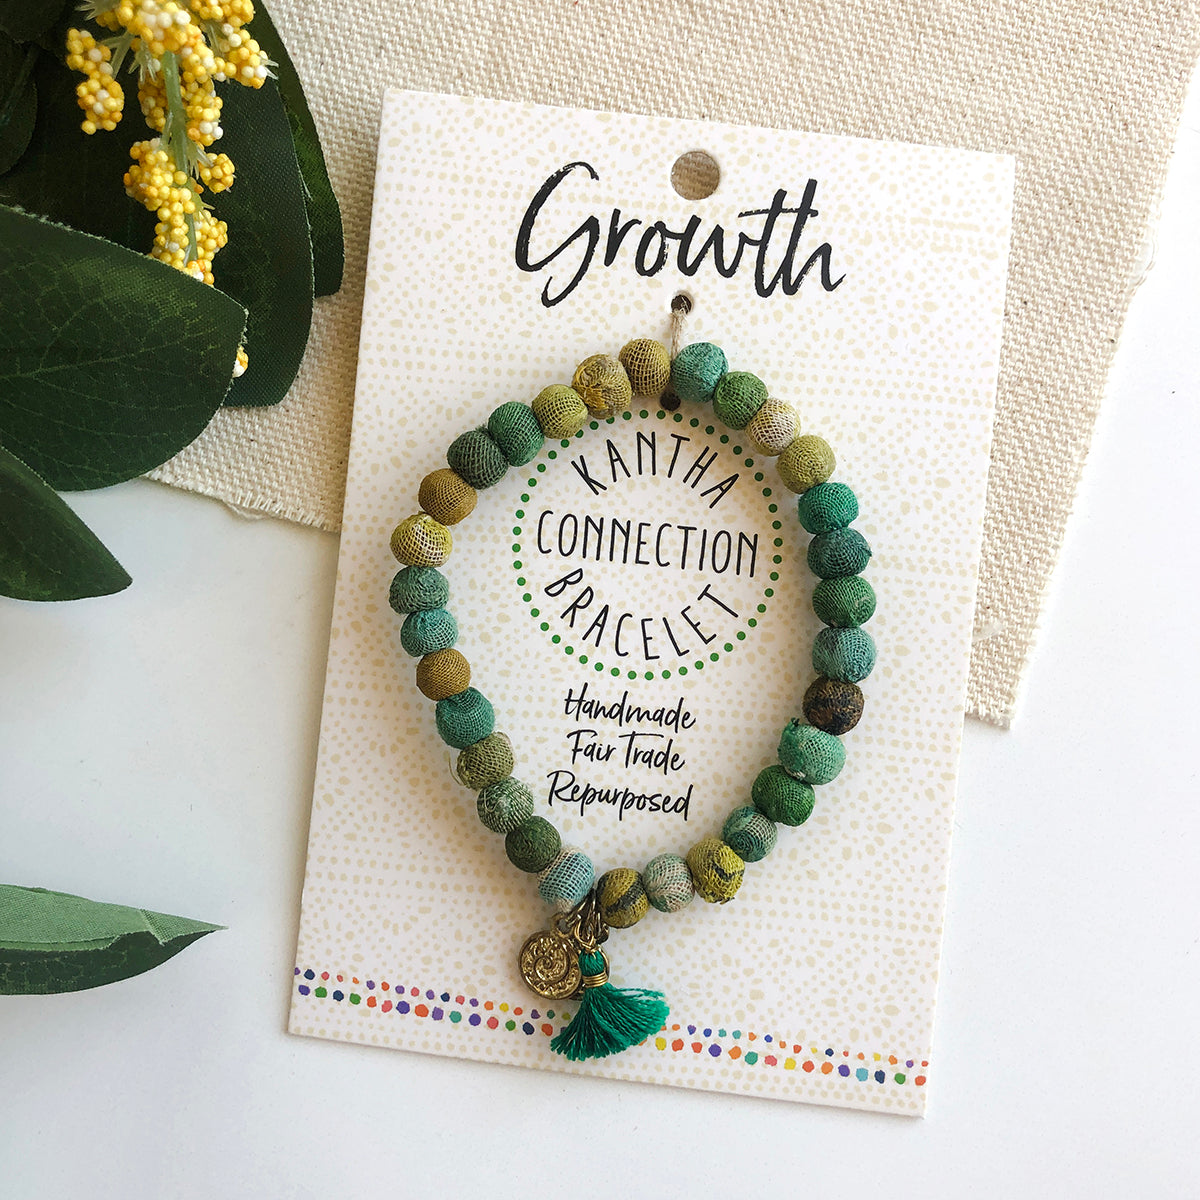 Load image into Gallery viewer, Growth Kantha Connection Bracelet
